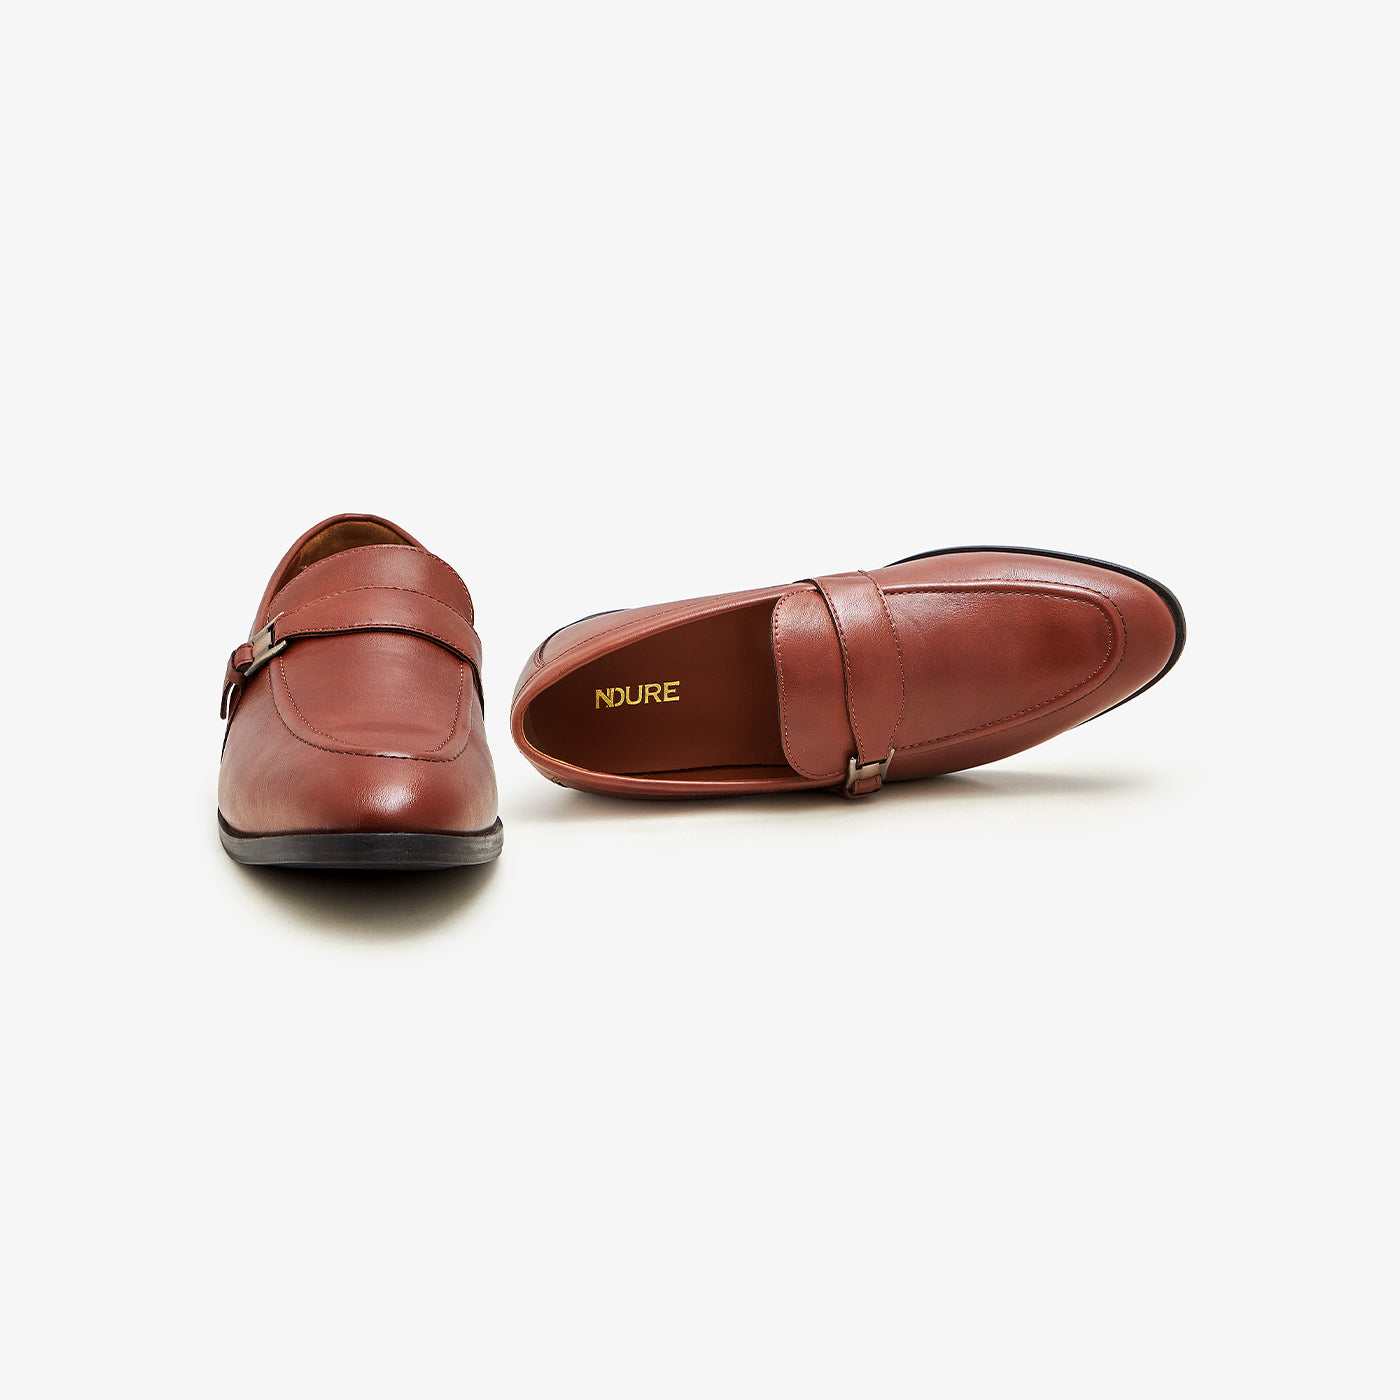 Men's Round Toed Dress Shoes